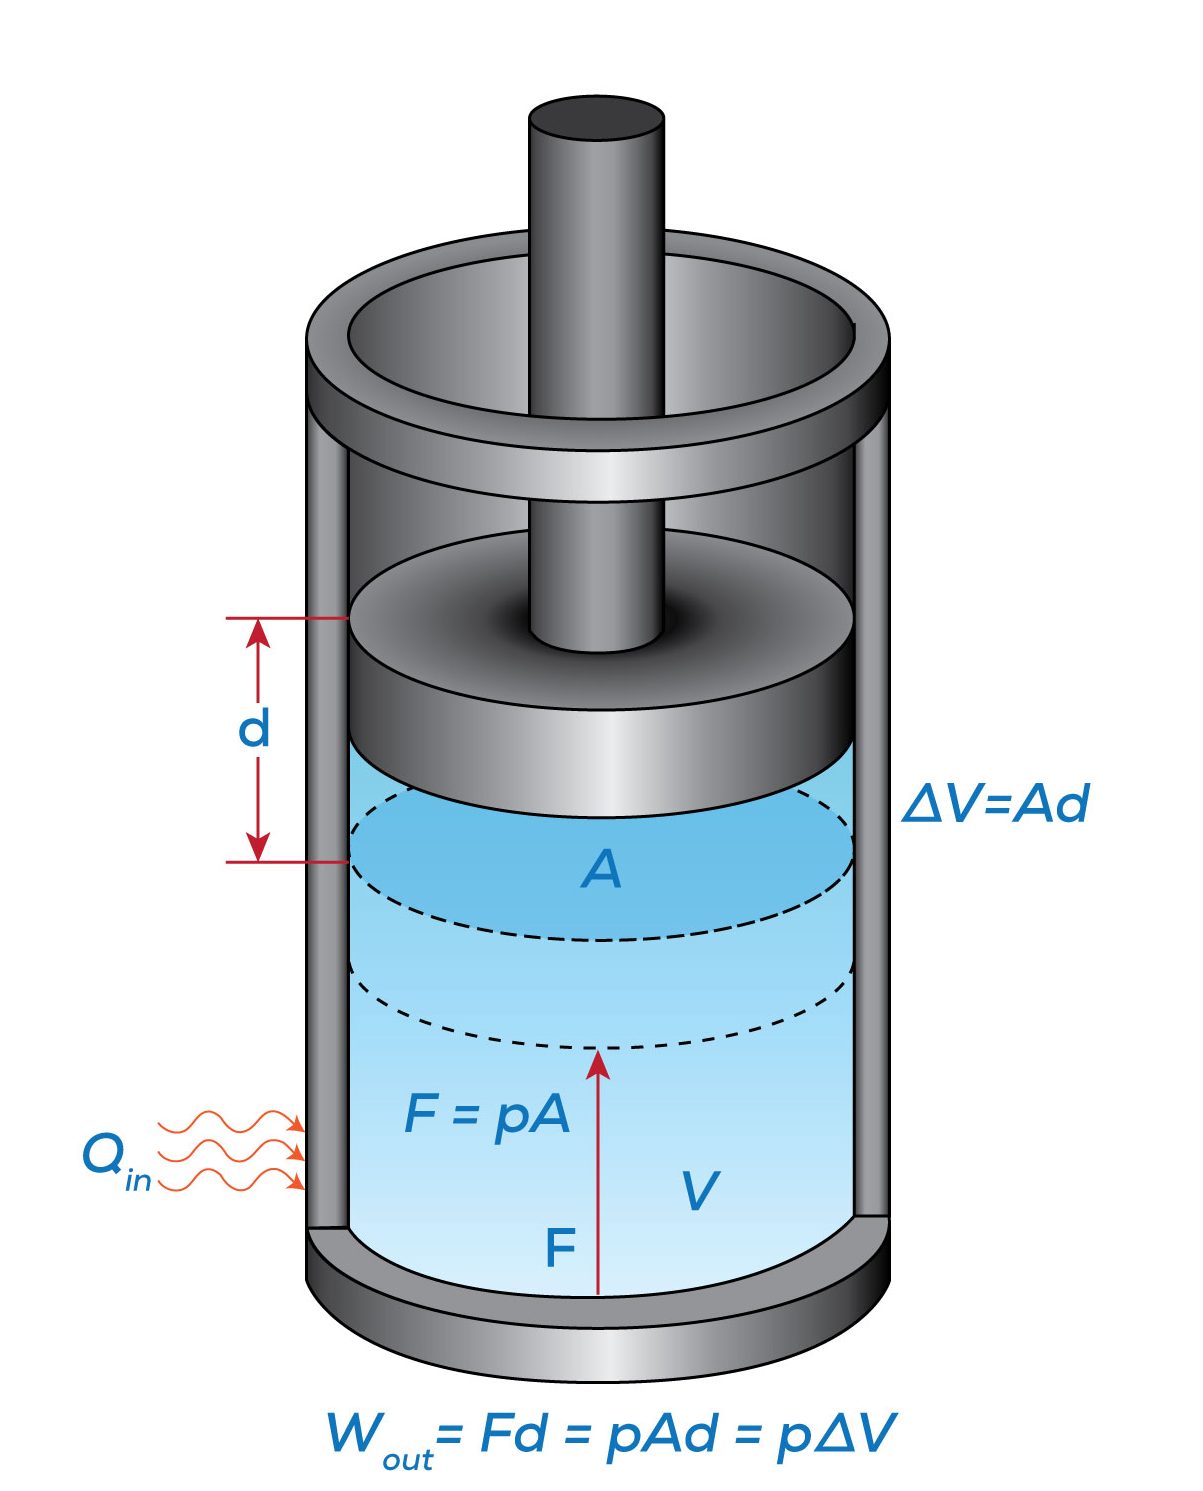 Boundary work caused by the expansion of gas in a piston cylinder device